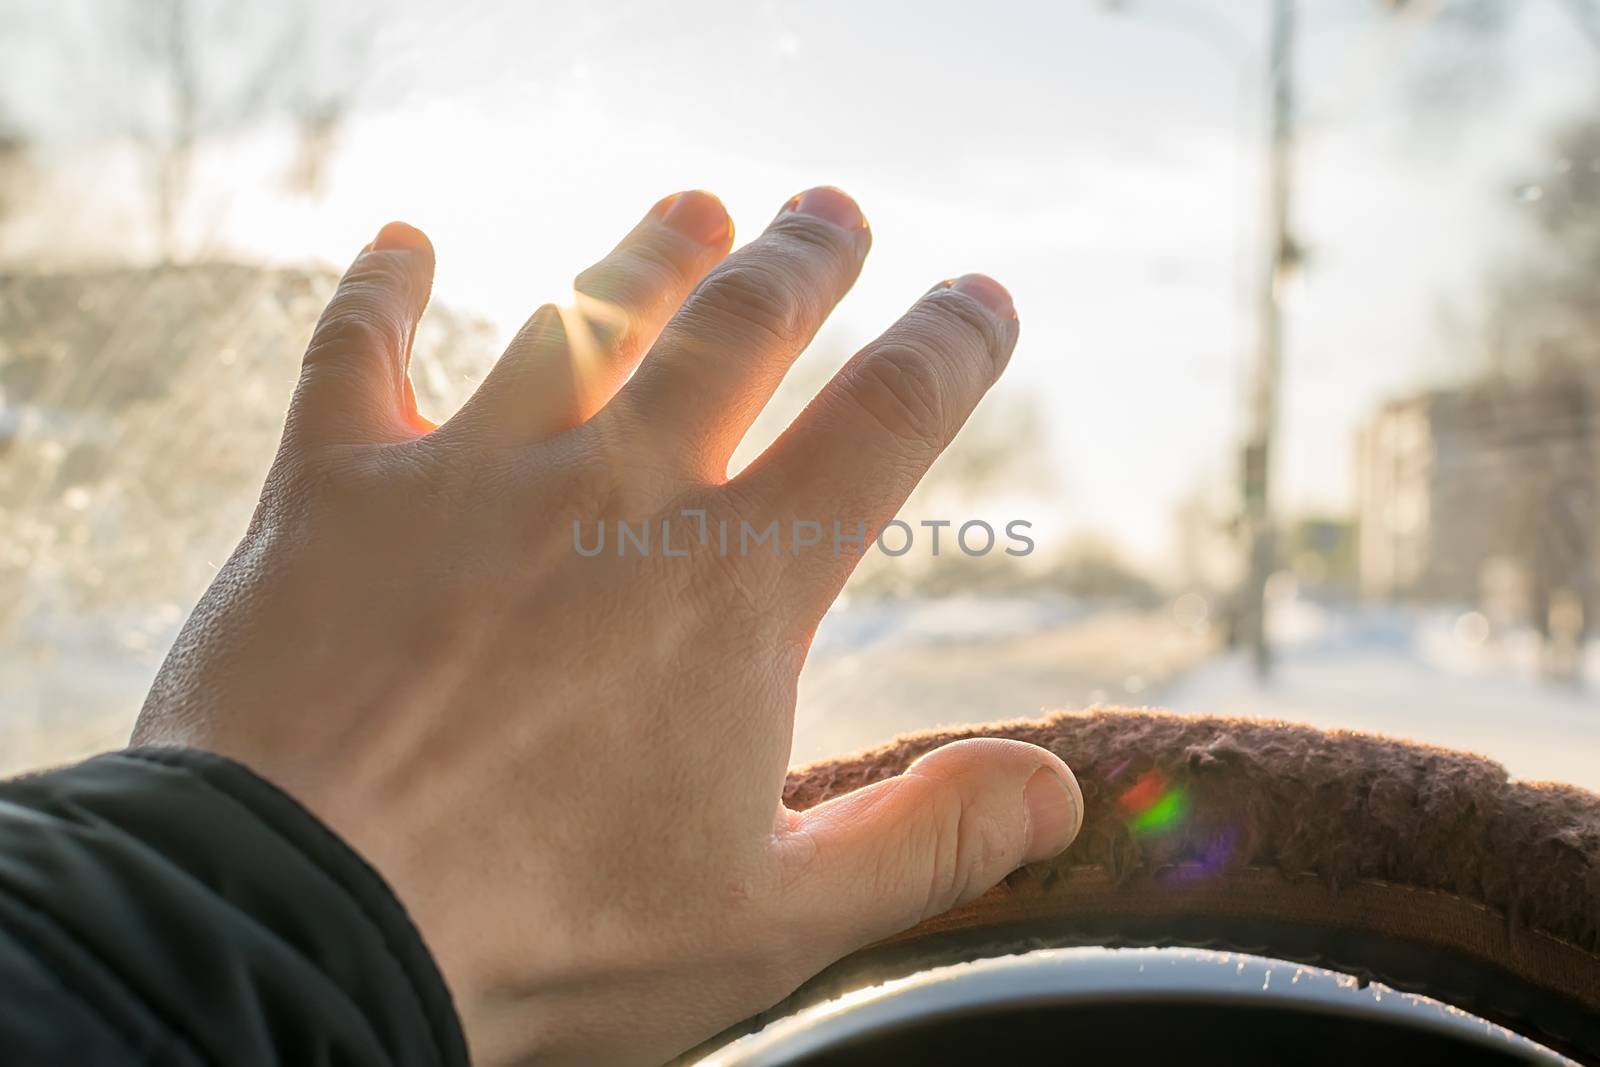 The hand of the driver of the car covers the sunlight, which blinds the person to see the road situation